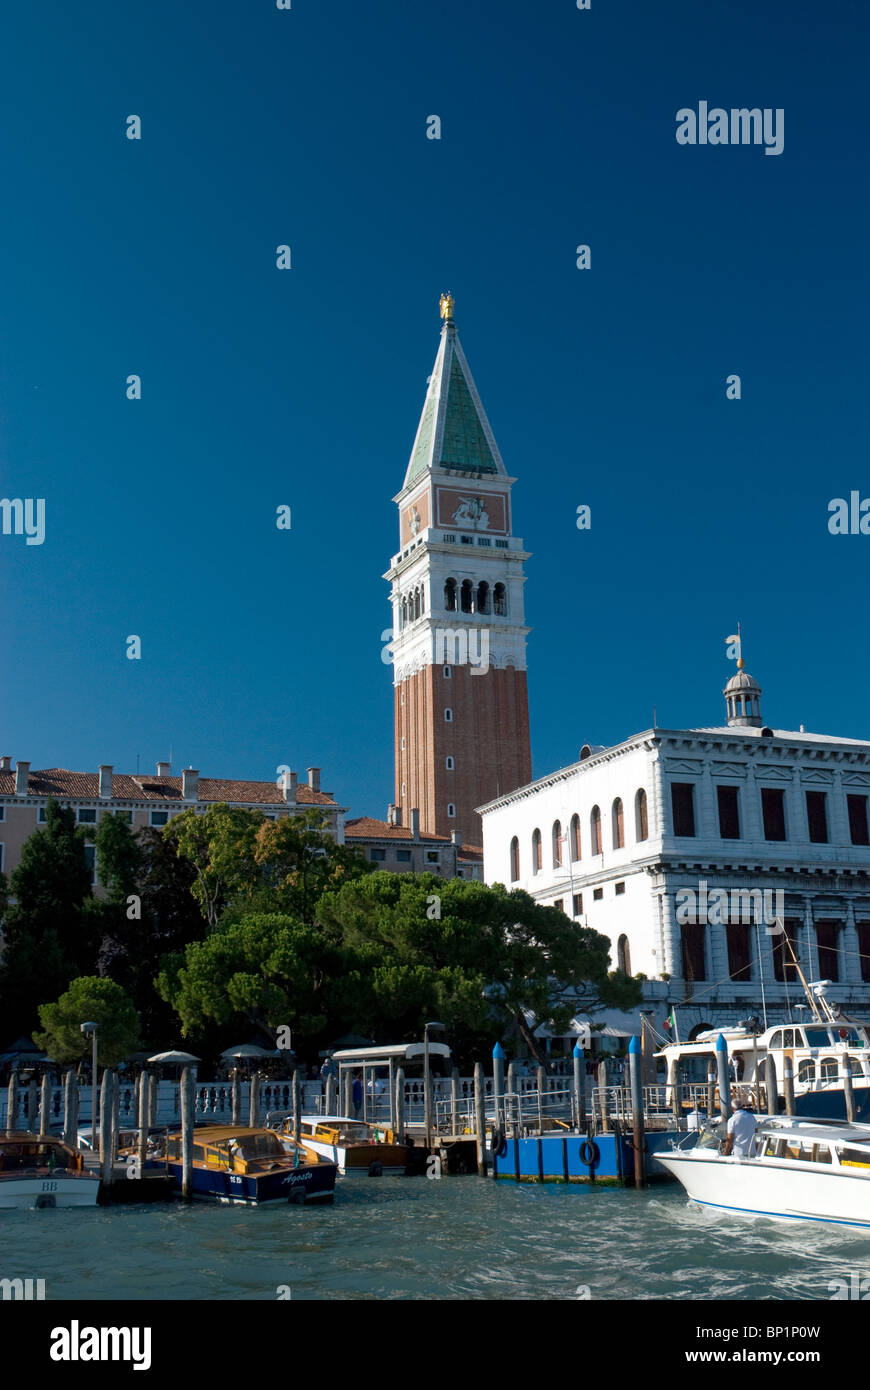 Campanile di San Marco or Bell Tower, St Marks, Venice Italy Stock Photo